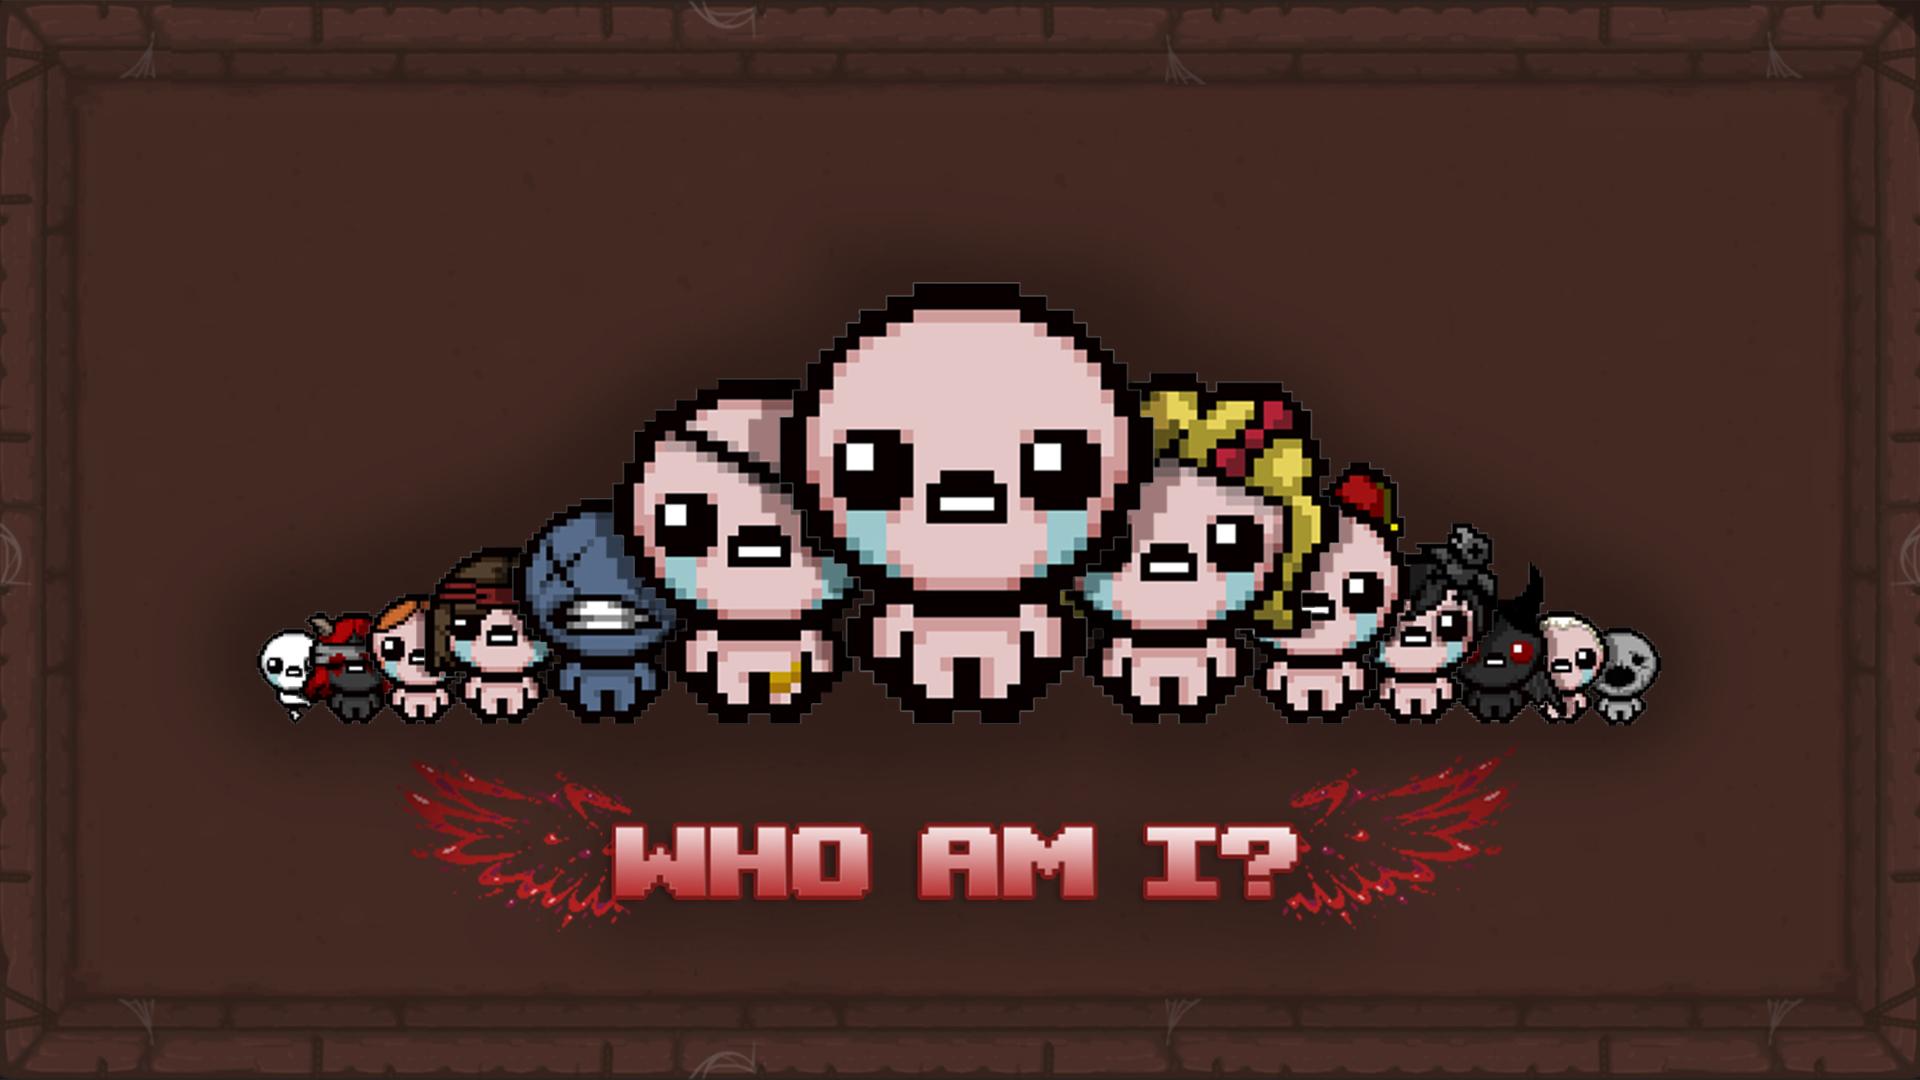 The Binding Of Isaac Wallpaper Free The Binding Of Isaac Background